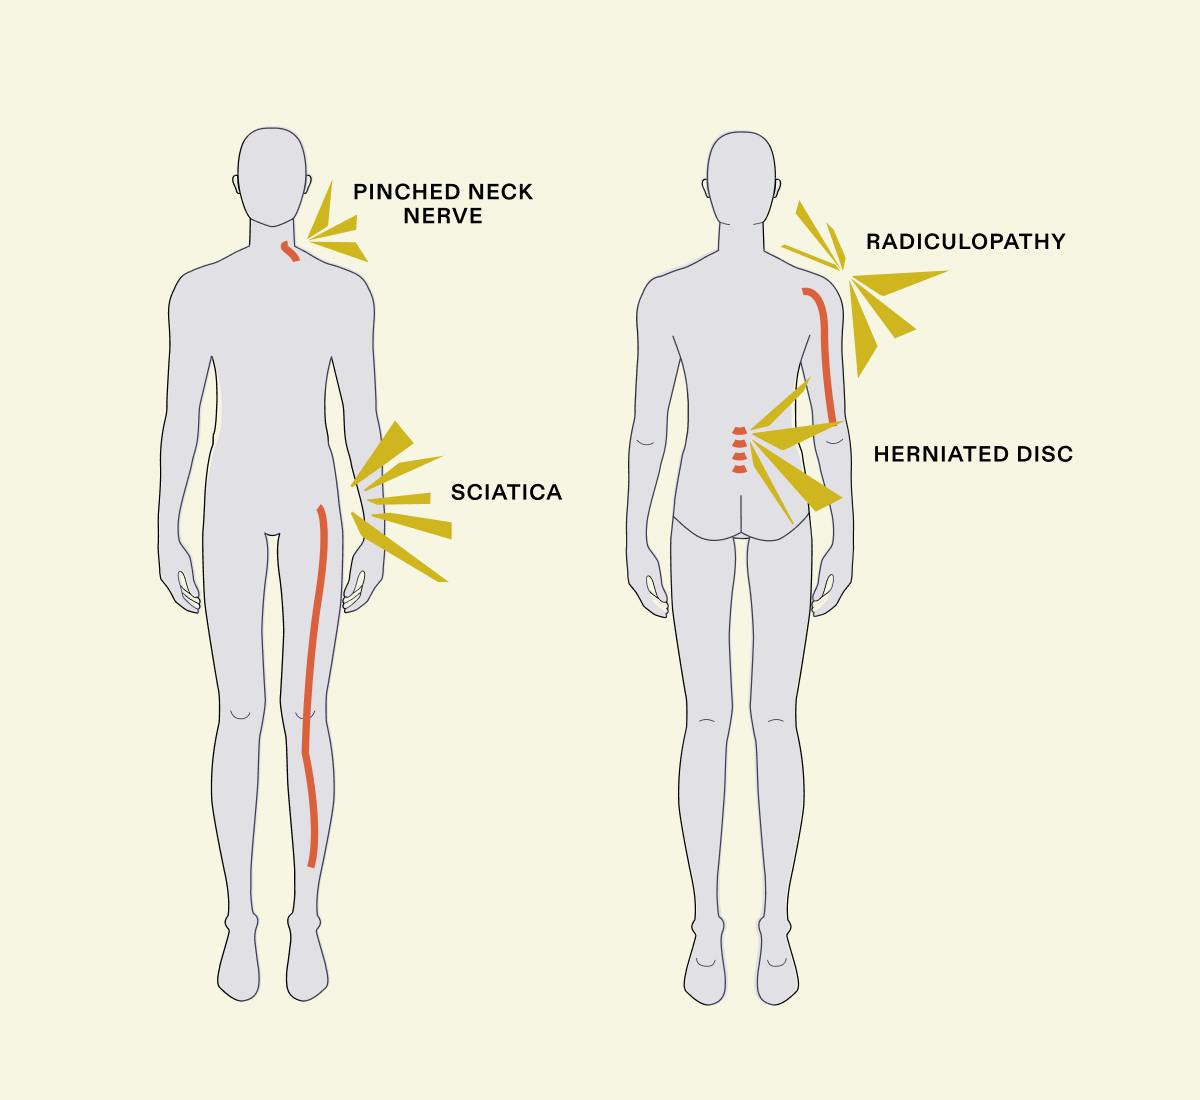 https://images.prismic.io/clearing/f38f88ae-18cf-443c-9647-453417f69c67_PinchedNerve_Infographic_2x.jpg?auto=compress,format